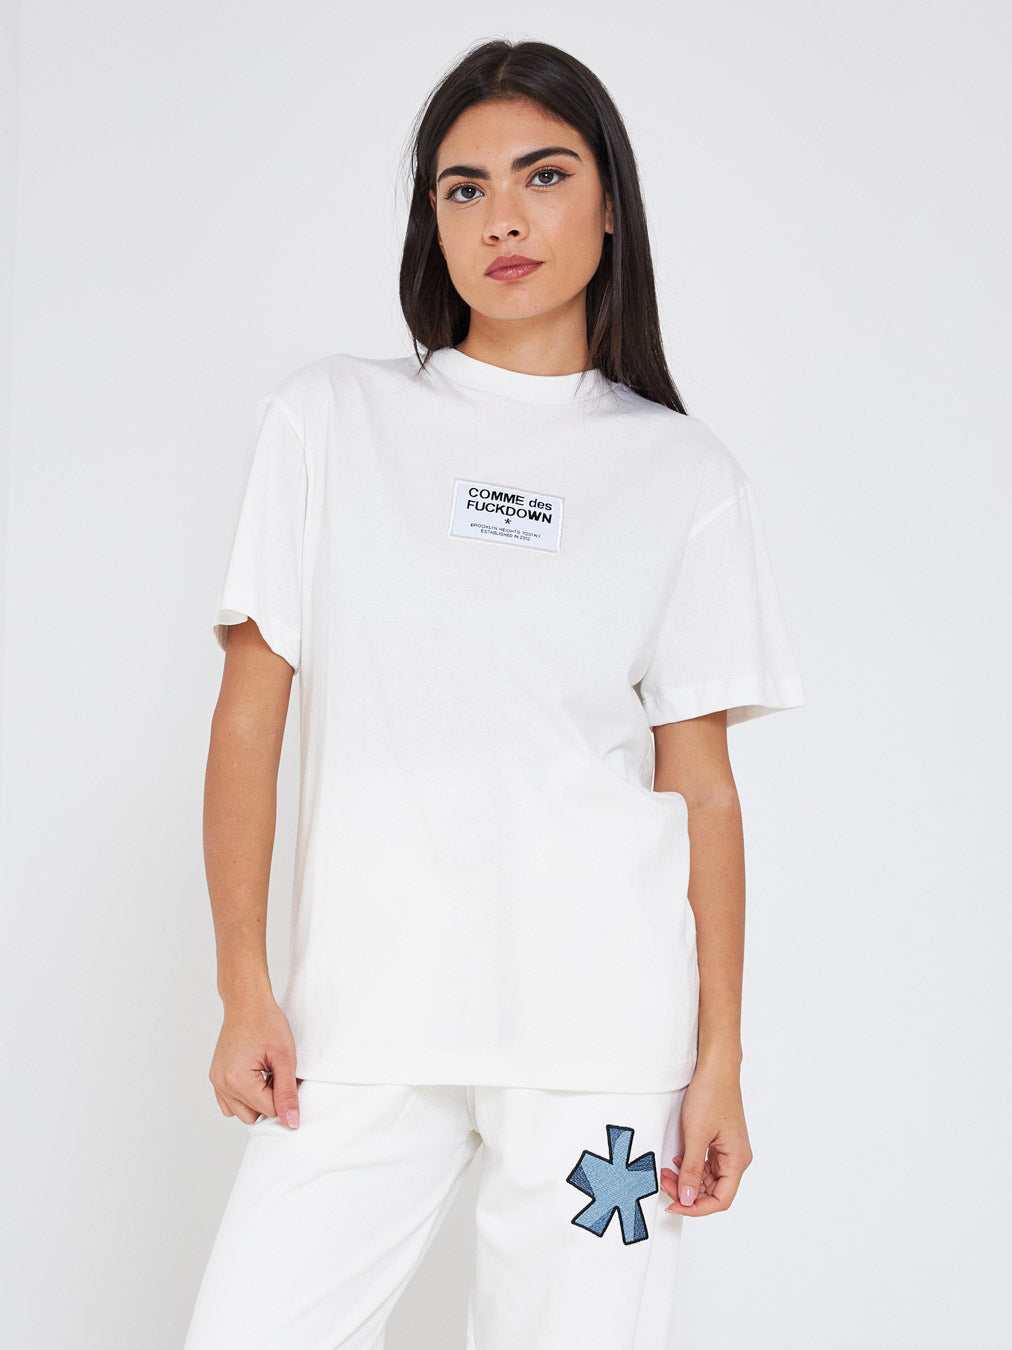 Comme Des Fuckdown white t-shirt with logo patch